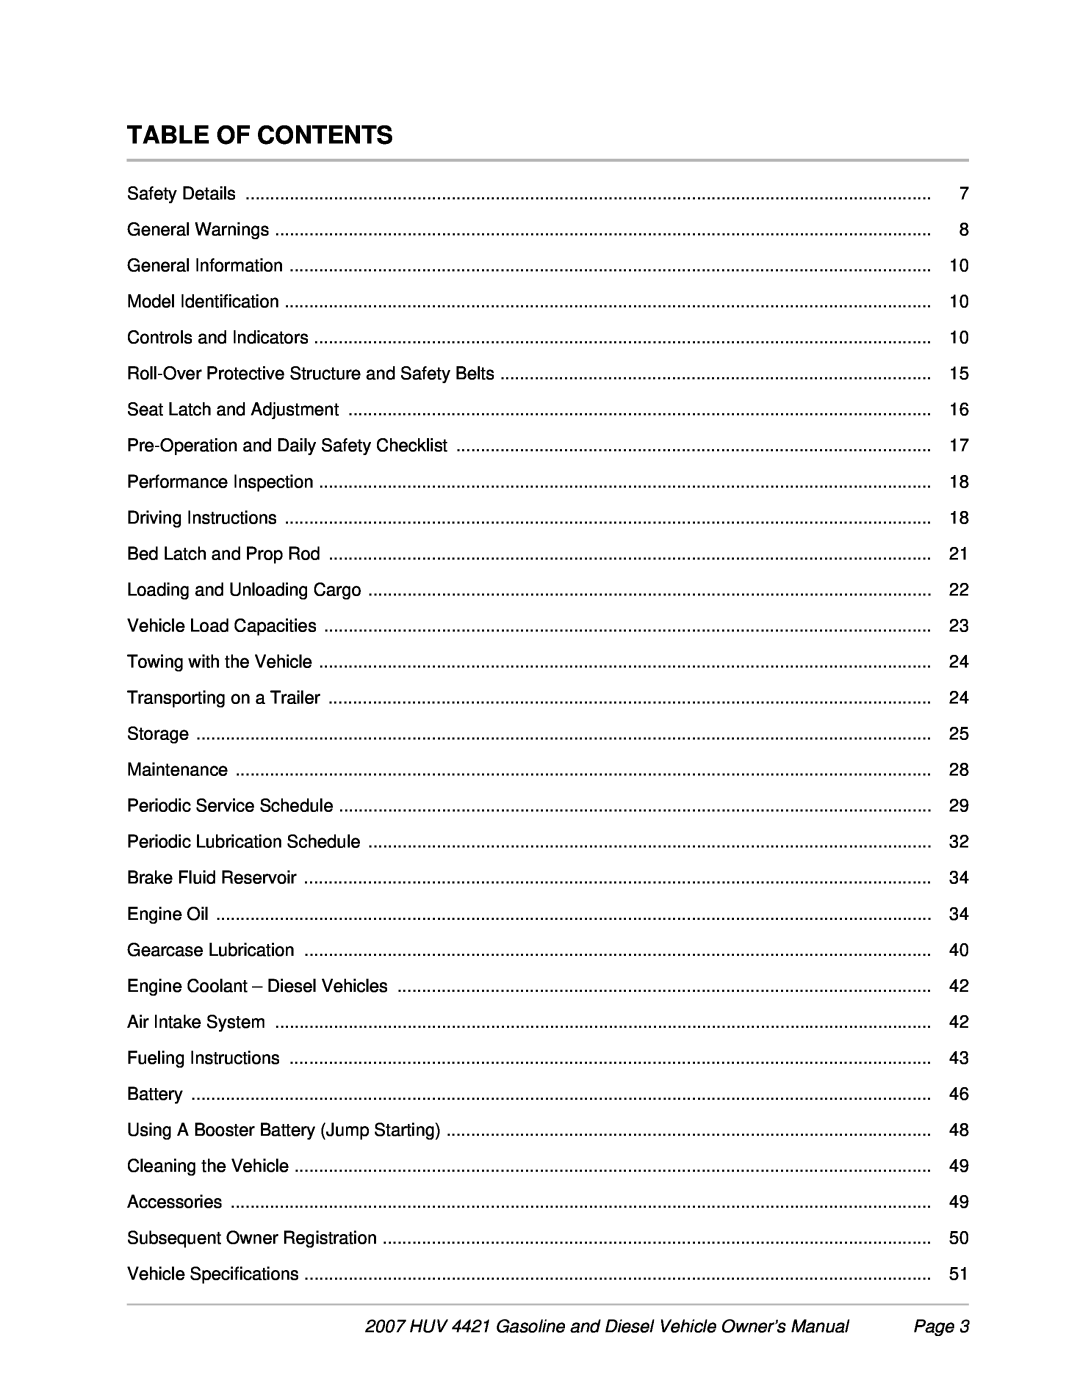 Husqvarna HUV 4421-D / DXP, HUV 4421-G / GXP Table Of Contents, HUV 4421 Gasoline and Diesel Vehicle Owner’s Manual, Page 